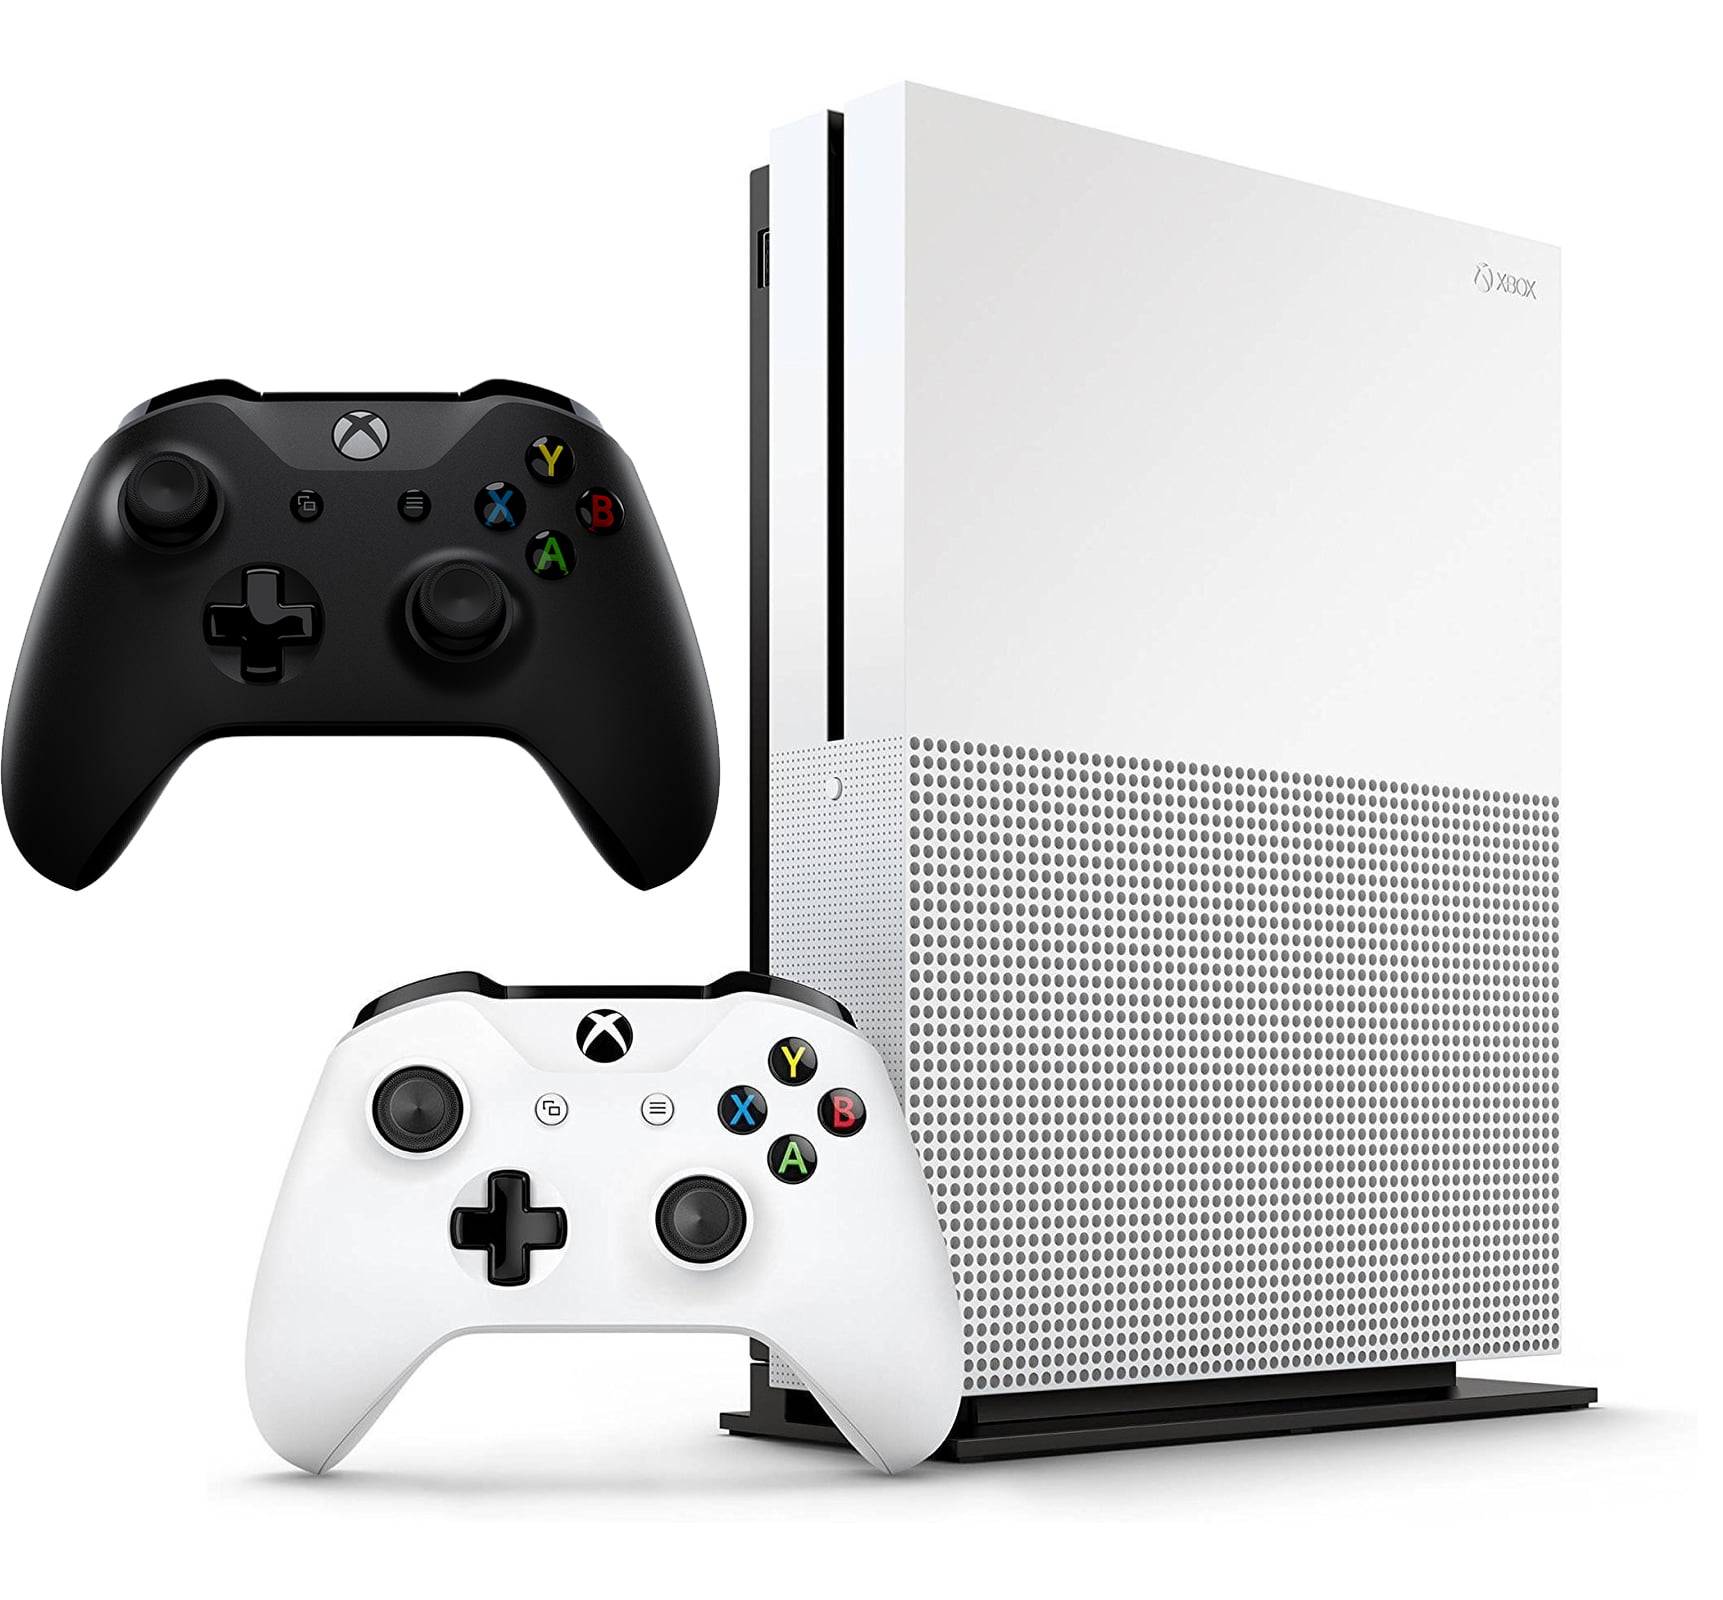 Xbox One S – Microsoft’s Newly Designed Gaming System